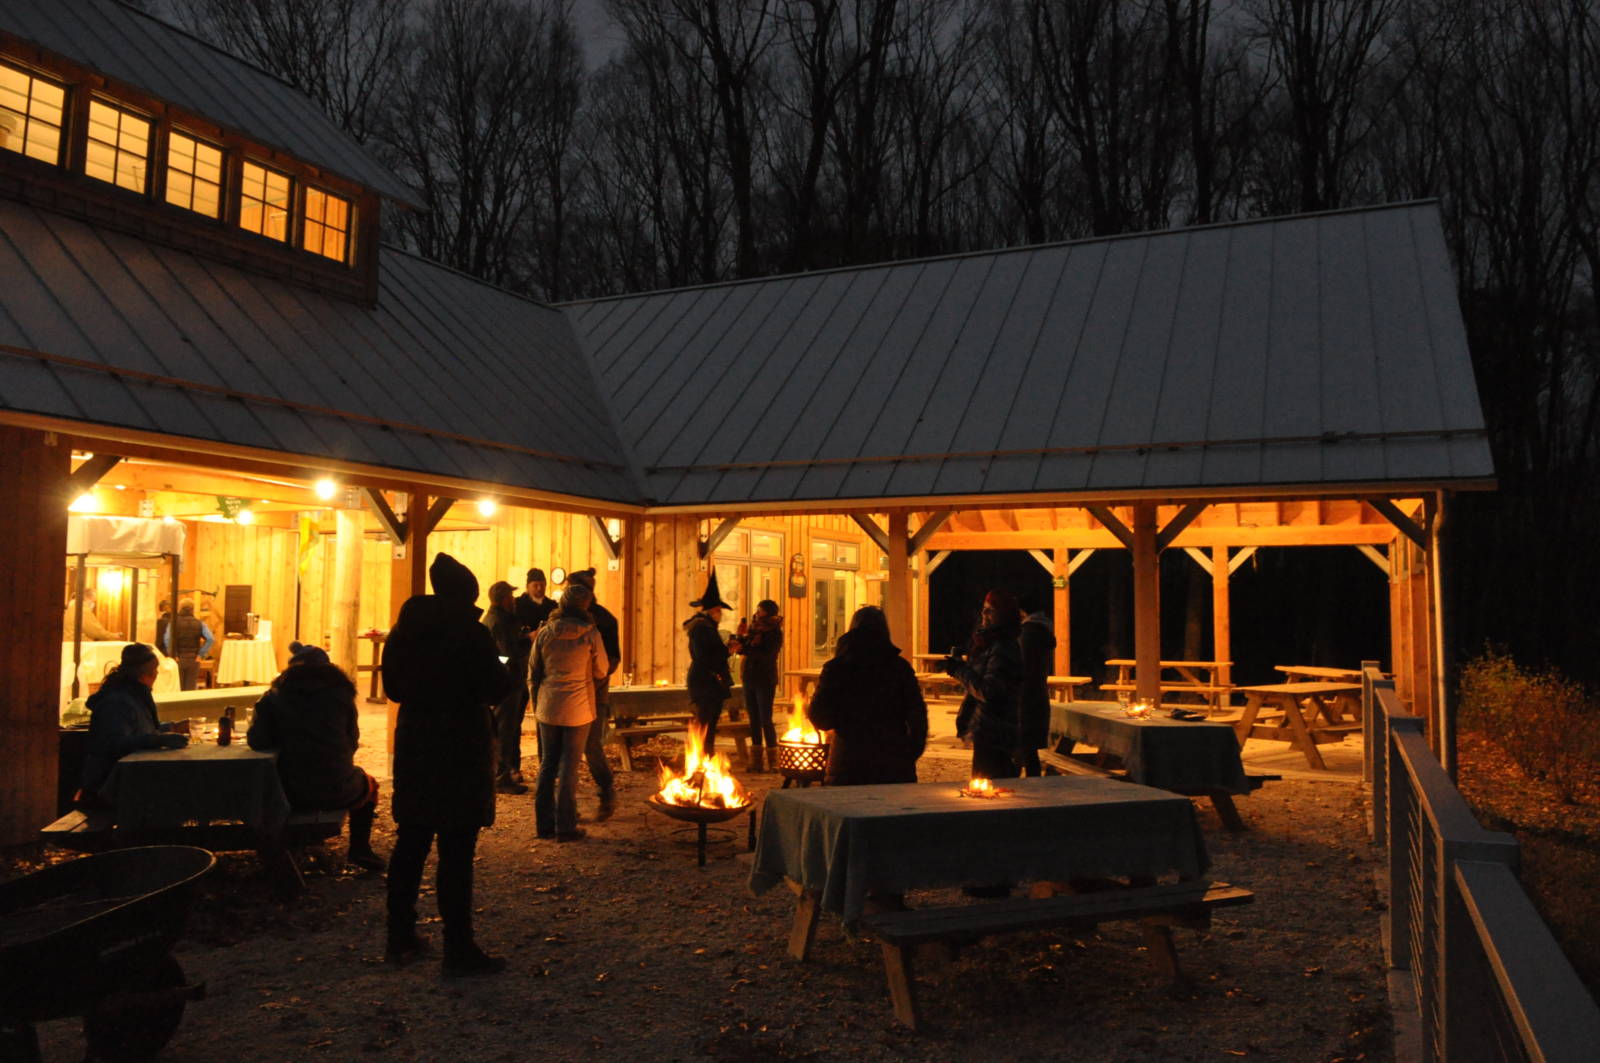 nighttime view of the sugarbush house lit up with people attending an event